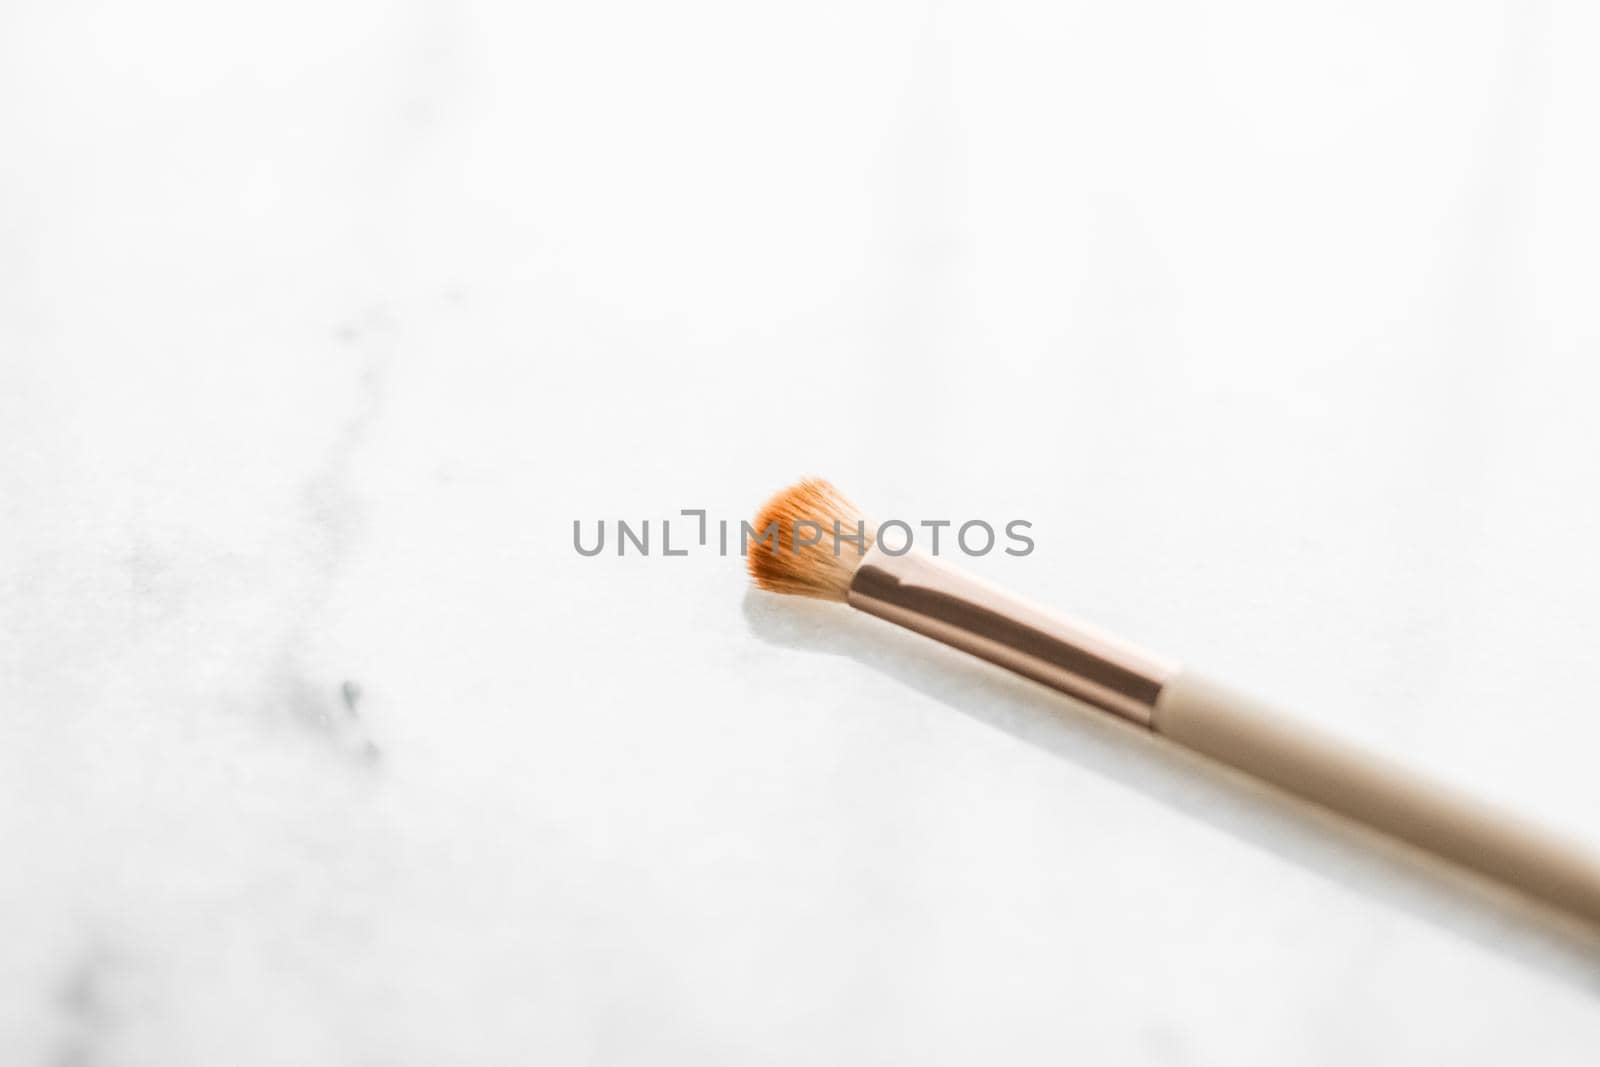 Cosmetic branding, blog and girly concept - Make-up brush for foundation base face contouring on marble background, mua cosmetics as glamour makeup artist product for luxury beauty brand art design